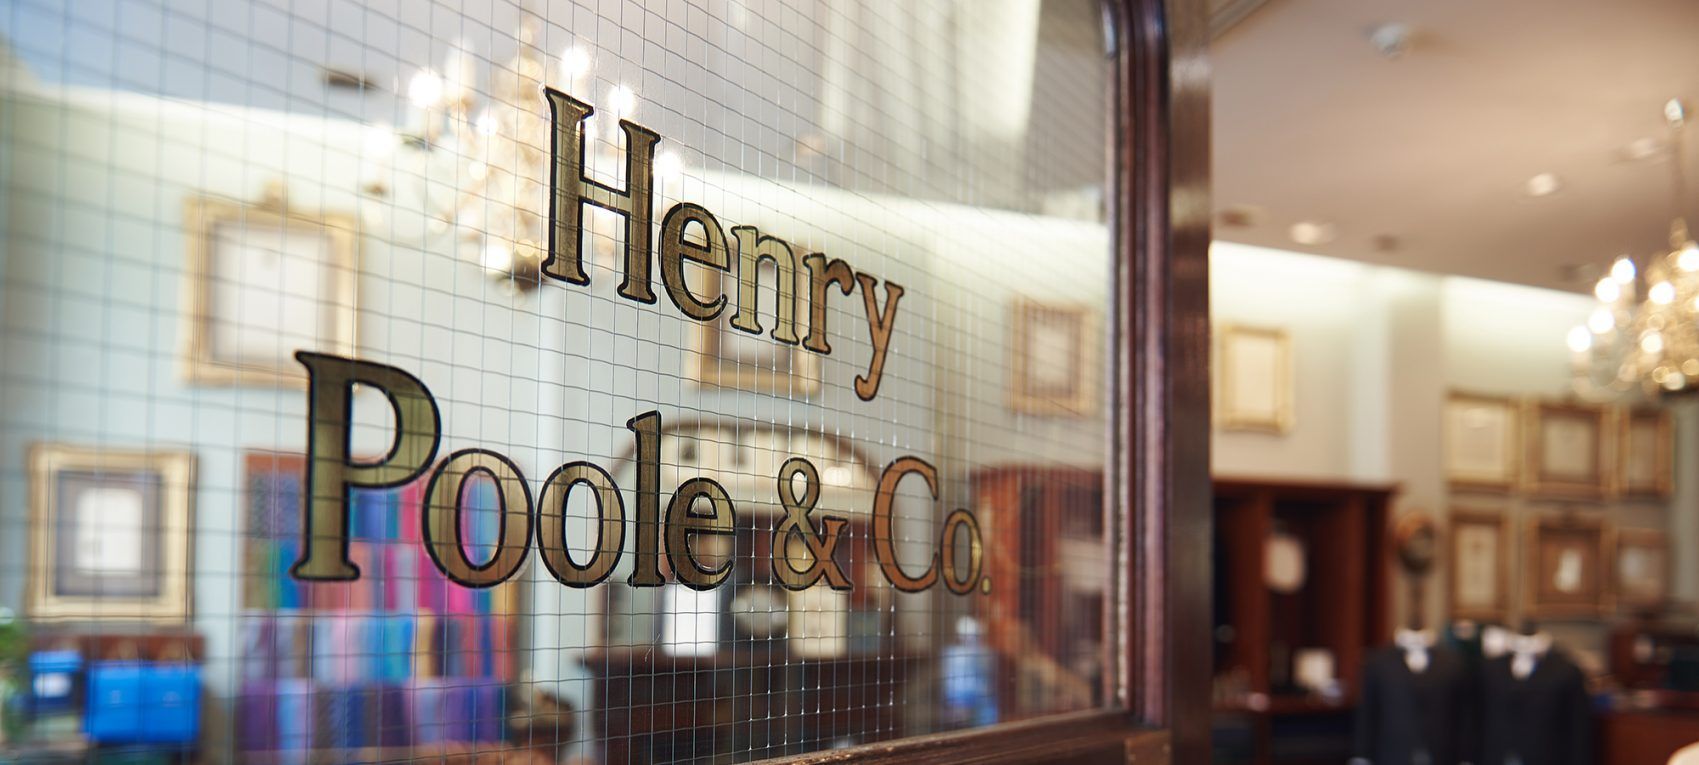 Henry Poole Savile Row Tailors Contact Us Image 1